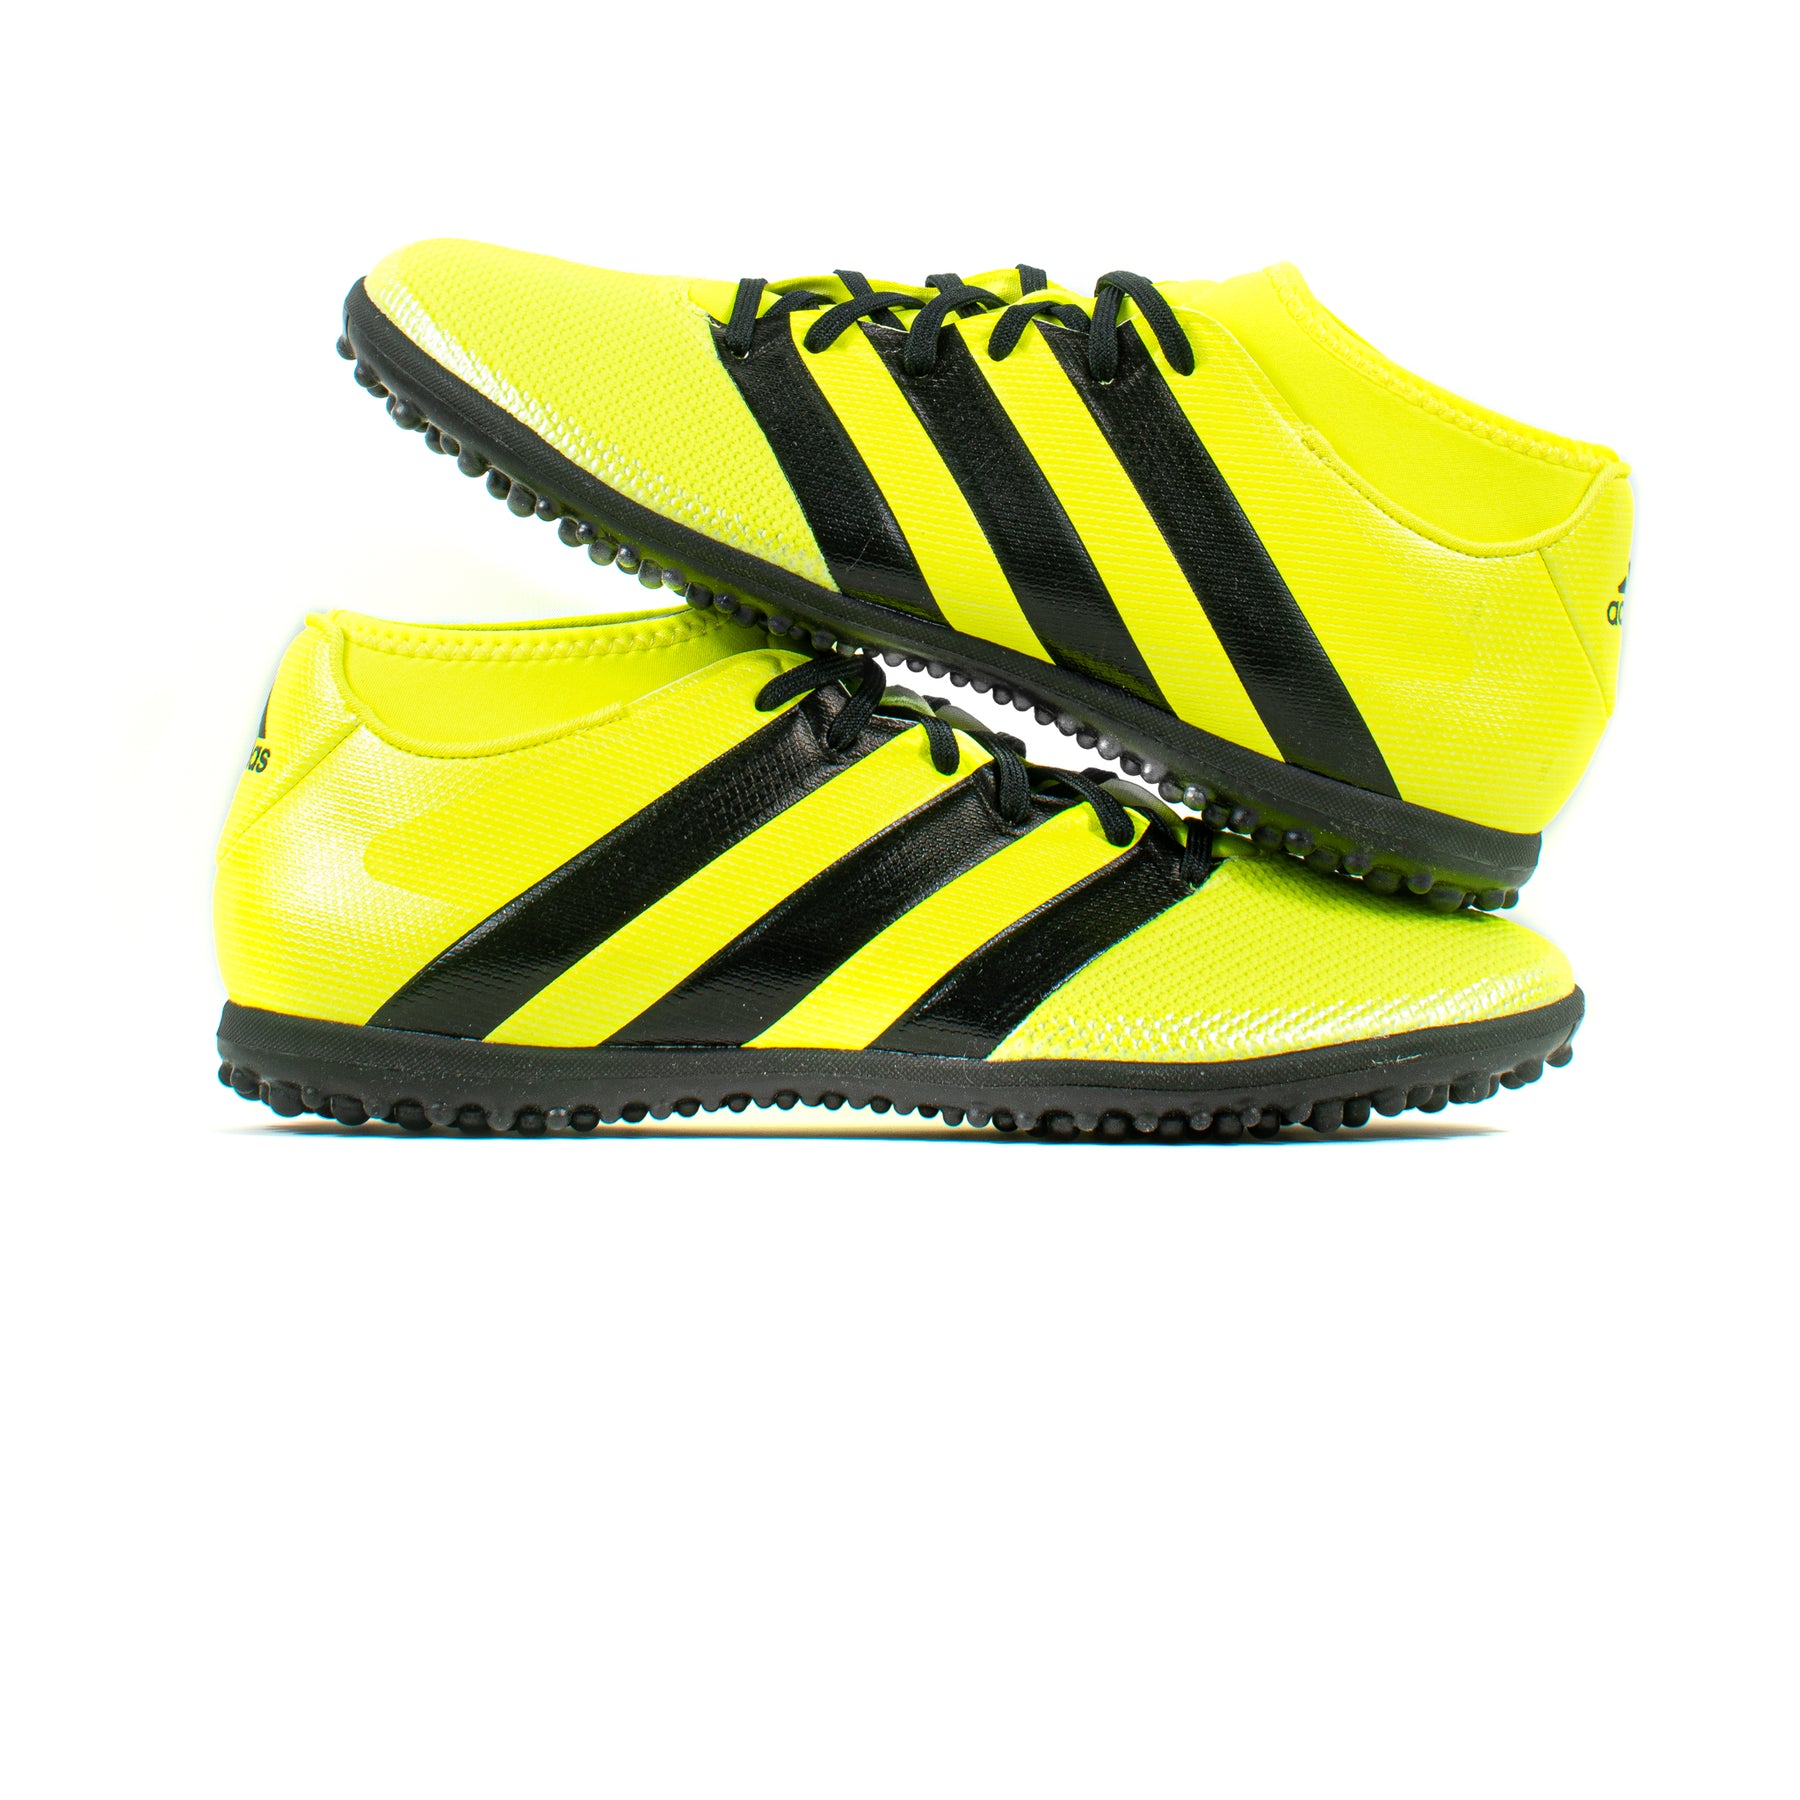 Adidas Ace 16.3 Primemesh Yellow – Classic Soccer Cleats